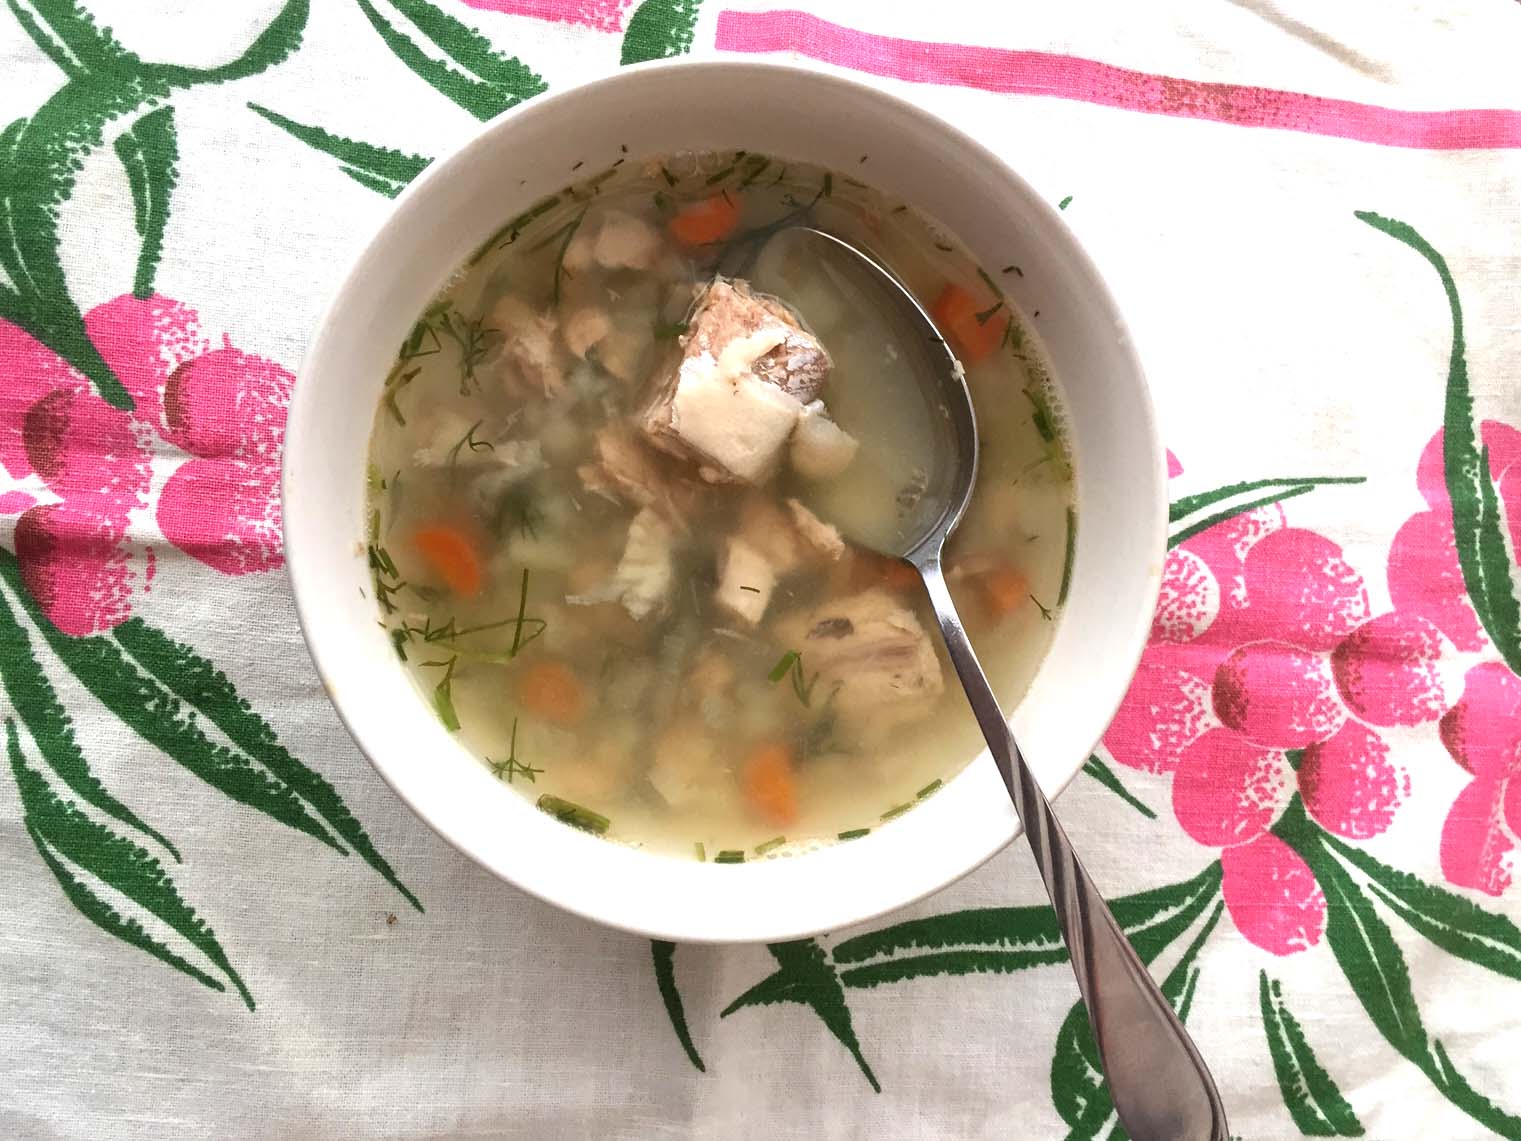 A spoon in the canned salmon soup